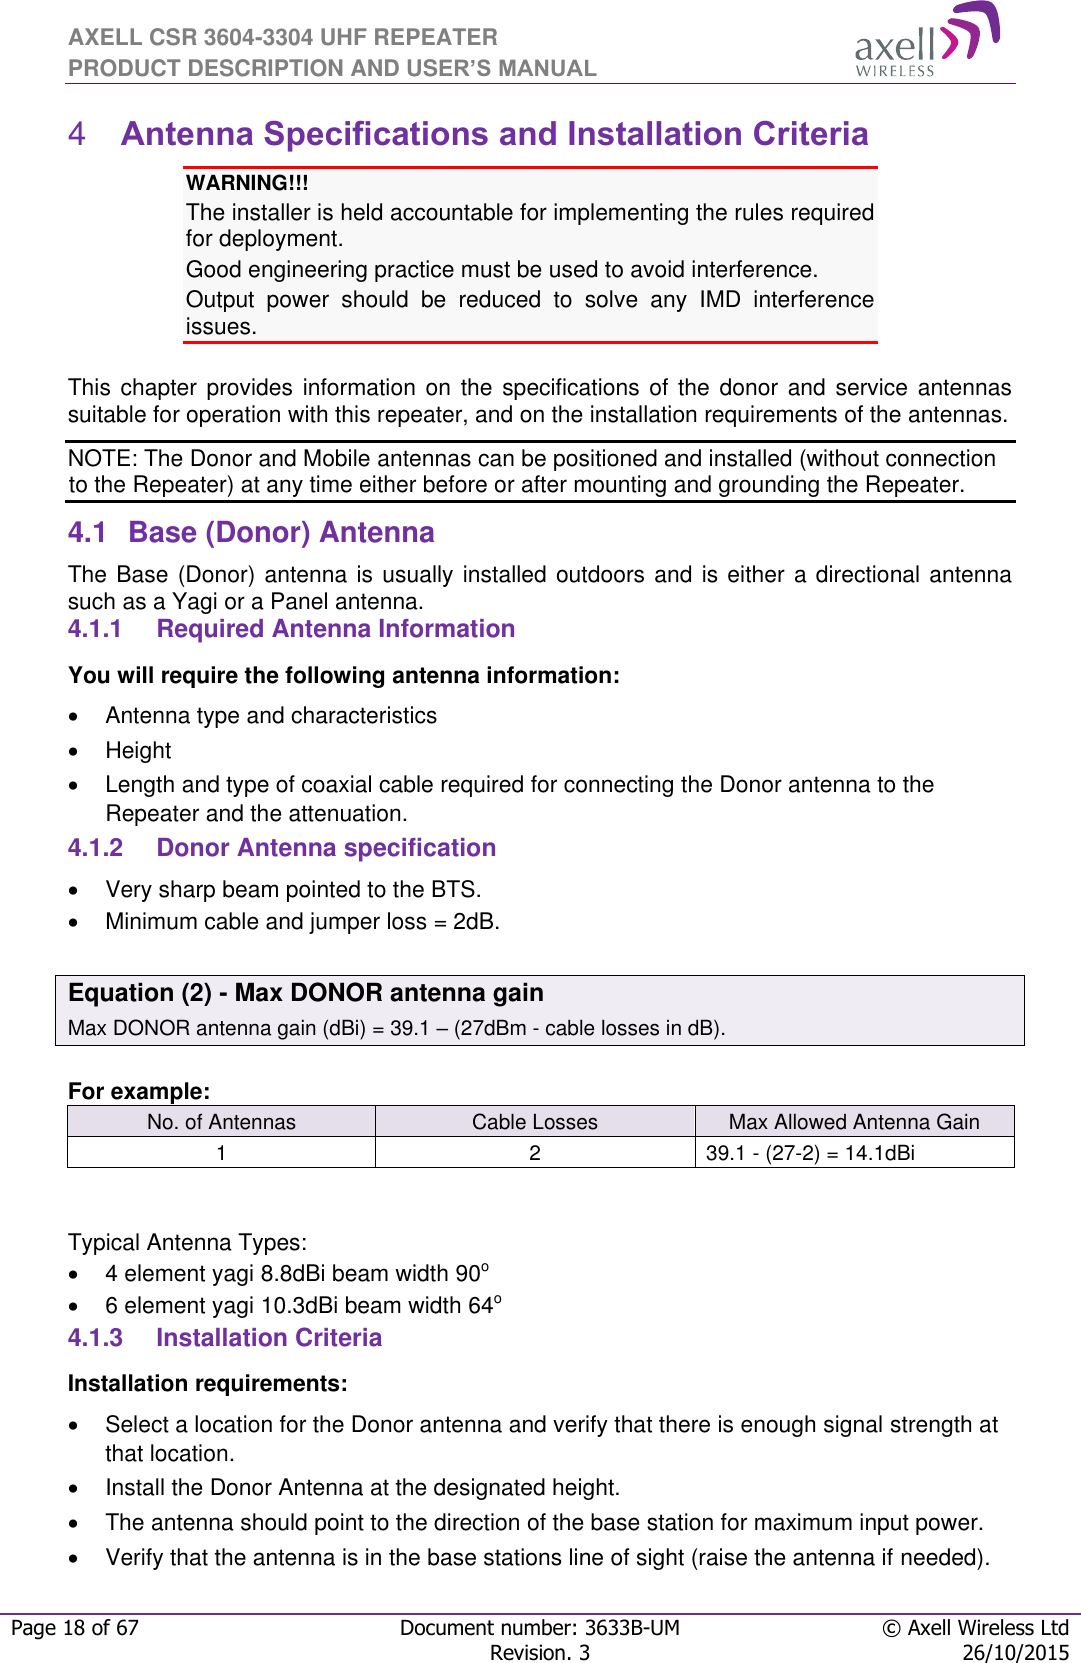 AXELL CSR 3604-3304 UHF REPEATER PRODUCT DESCRIPTION AND USER’S MANUAL  Page 18 of 67 Document number: 3633B-UM © Axell Wireless Ltd  Revision. 3 26/10/2015   Antenna Specifications and Installation Criteria 4WARNING!!!  The installer is held accountable for implementing the rules required for deployment. Good engineering practice must be used to avoid interference. Output  power  should  be  reduced  to  solve  any  IMD  interference issues.  This chapter provides  information  on  the specifications of the  donor  and service antennas suitable for operation with this repeater, and on the installation requirements of the antennas. NOTE: The Donor and Mobile antennas can be positioned and installed (without connection to the Repeater) at any time either before or after mounting and grounding the Repeater. 4.1  Base (Donor) Antenna  The Base (Donor) antenna is usually installed outdoors and is either a directional antenna such as a Yagi or a Panel antenna. 4.1.1  Required Antenna Information You will require the following antenna information:   Antenna type and characteristics   Height  Length and type of coaxial cable required for connecting the Donor antenna to the Repeater and the attenuation. 4.1.2  Donor Antenna specification   Very sharp beam pointed to the BTS.   Minimum cable and jumper loss = 2dB.  Equation (2) - Max DONOR antenna gain Max DONOR antenna gain (dBi) = 39.1 – (27dBm - cable losses in dB).  For example: No. of Antennas Cable Losses Max Allowed Antenna Gain 1 2 39.1 - (27-2) = 14.1dBi   Typical Antenna Types:   4 element yagi 8.8dBi beam width 90o   6 element yagi 10.3dBi beam width 64o 4.1.3  Installation Criteria Installation requirements:   Select a location for the Donor antenna and verify that there is enough signal strength at that location.   Install the Donor Antenna at the designated height.  The antenna should point to the direction of the base station for maximum input power.   Verify that the antenna is in the base stations line of sight (raise the antenna if needed).  